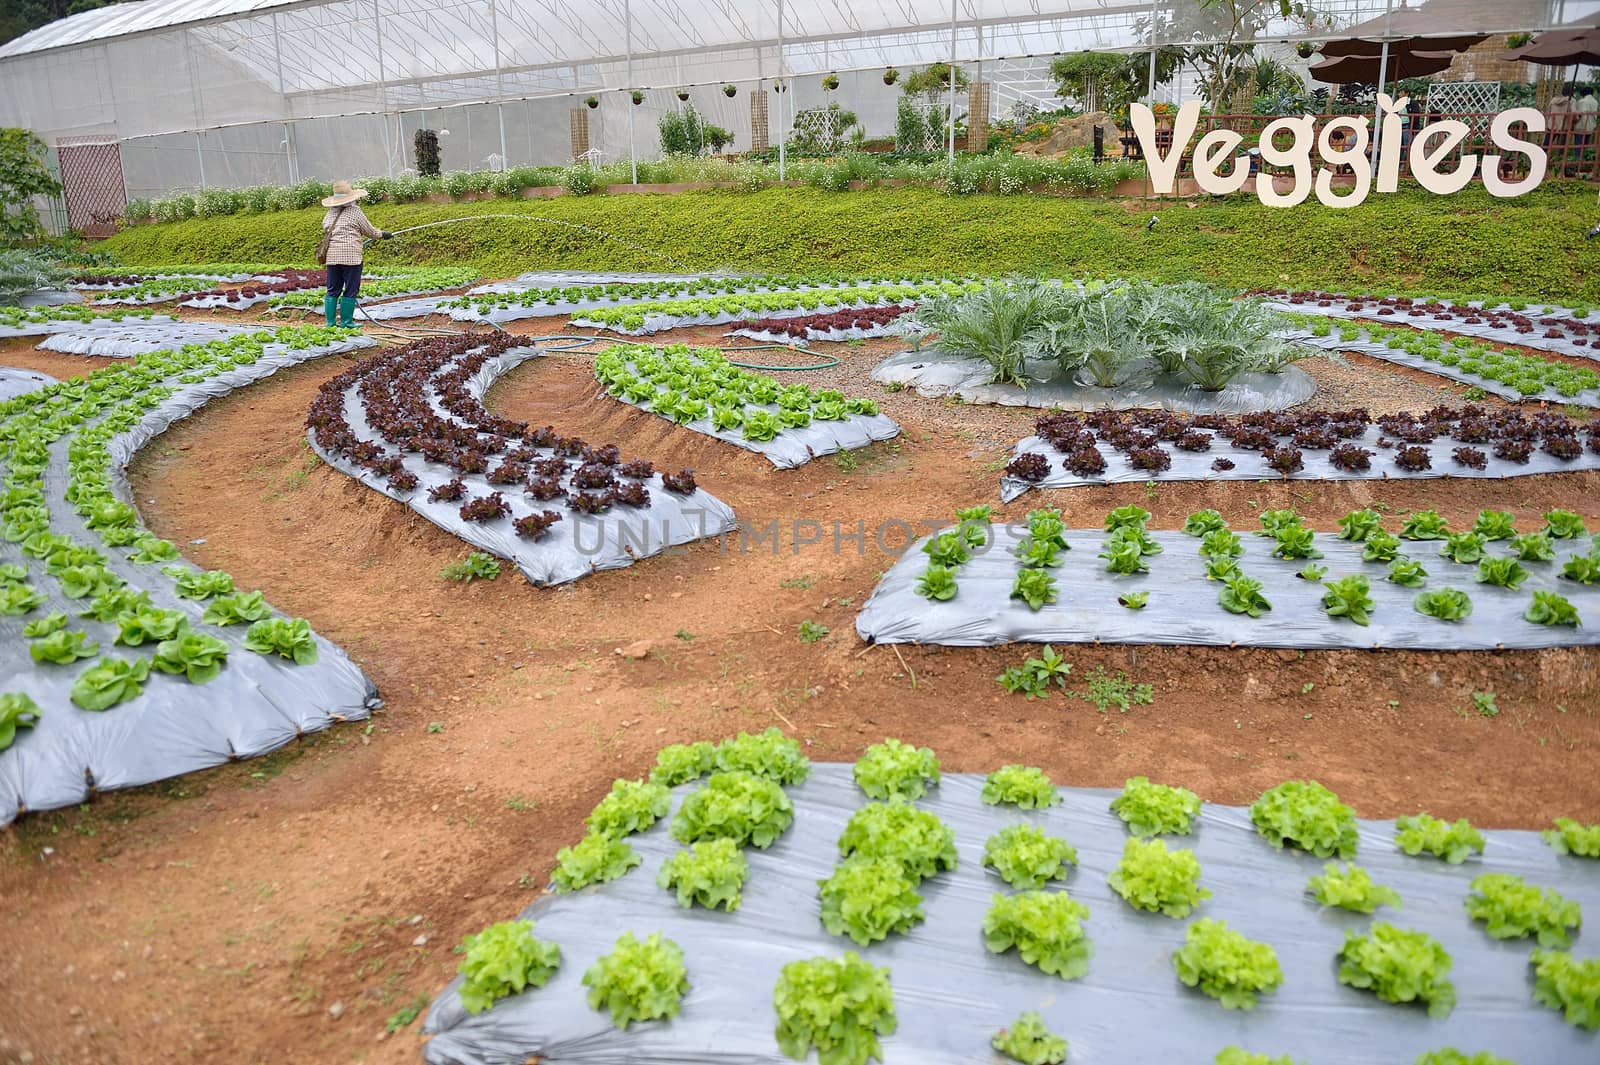 worker in veggie plot at Doi Angkhang royal project, Chiangmai, Thailand.